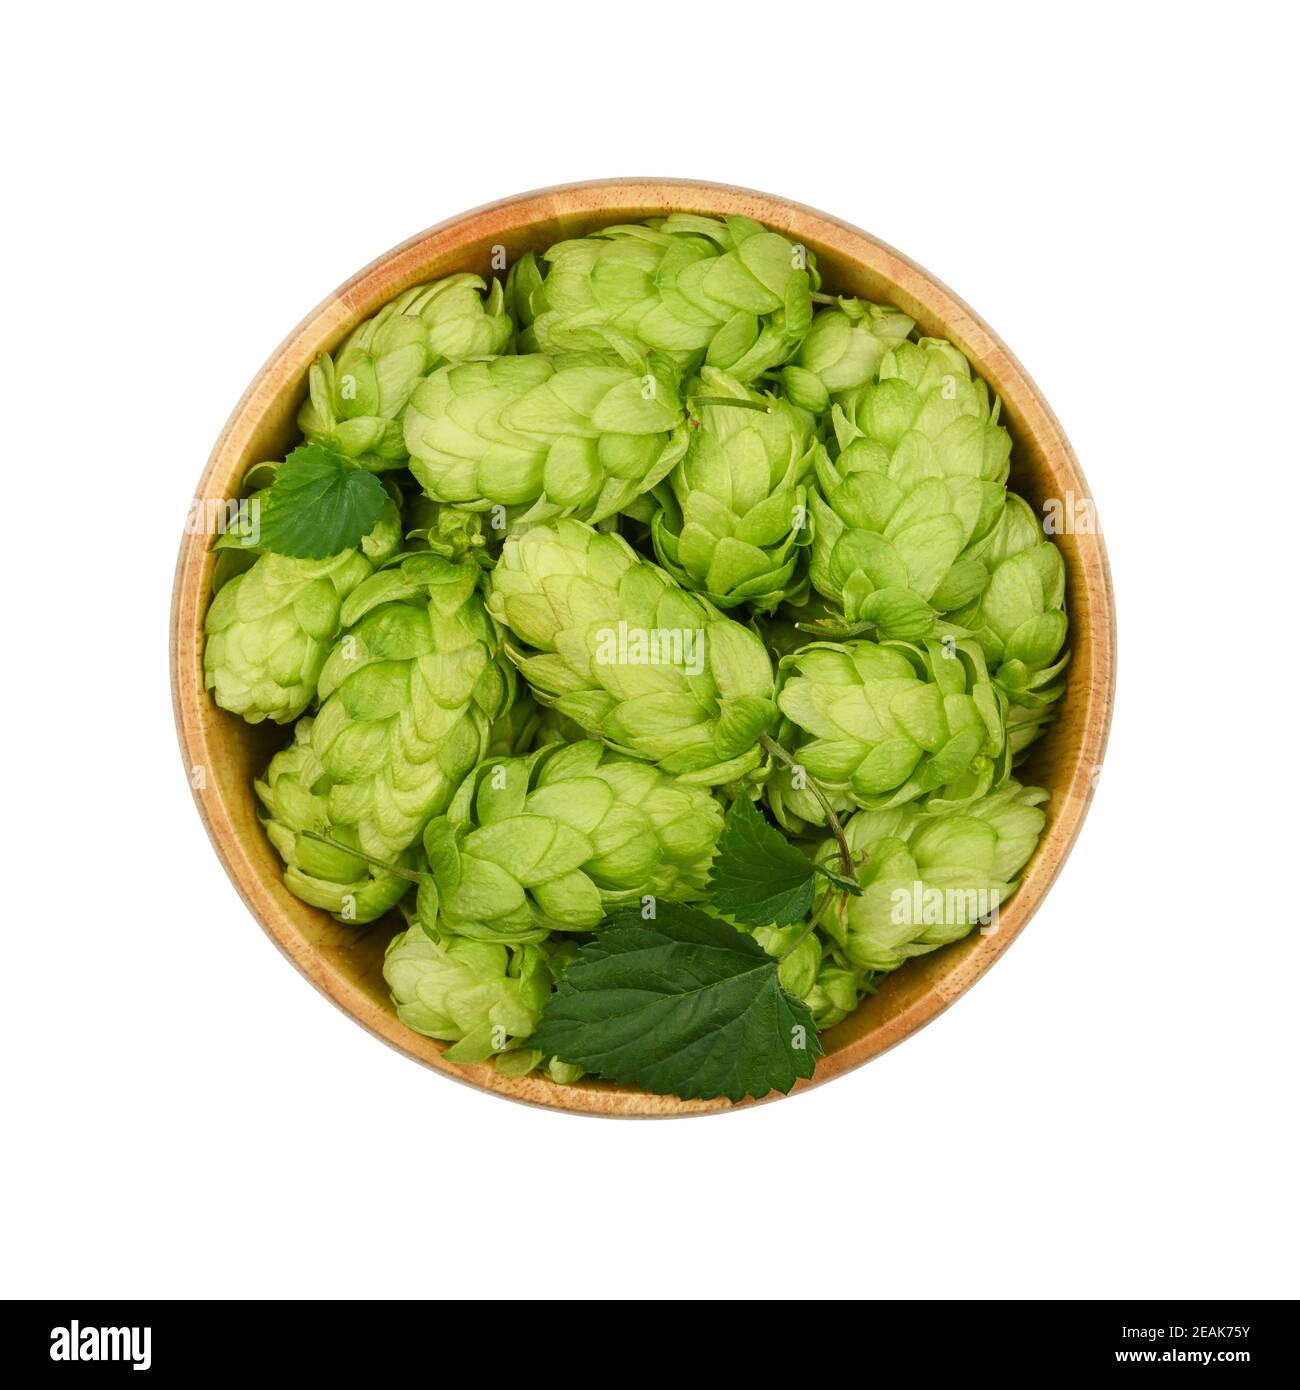 Wooden bowl of fresh green hops isolated on white Stock Photo